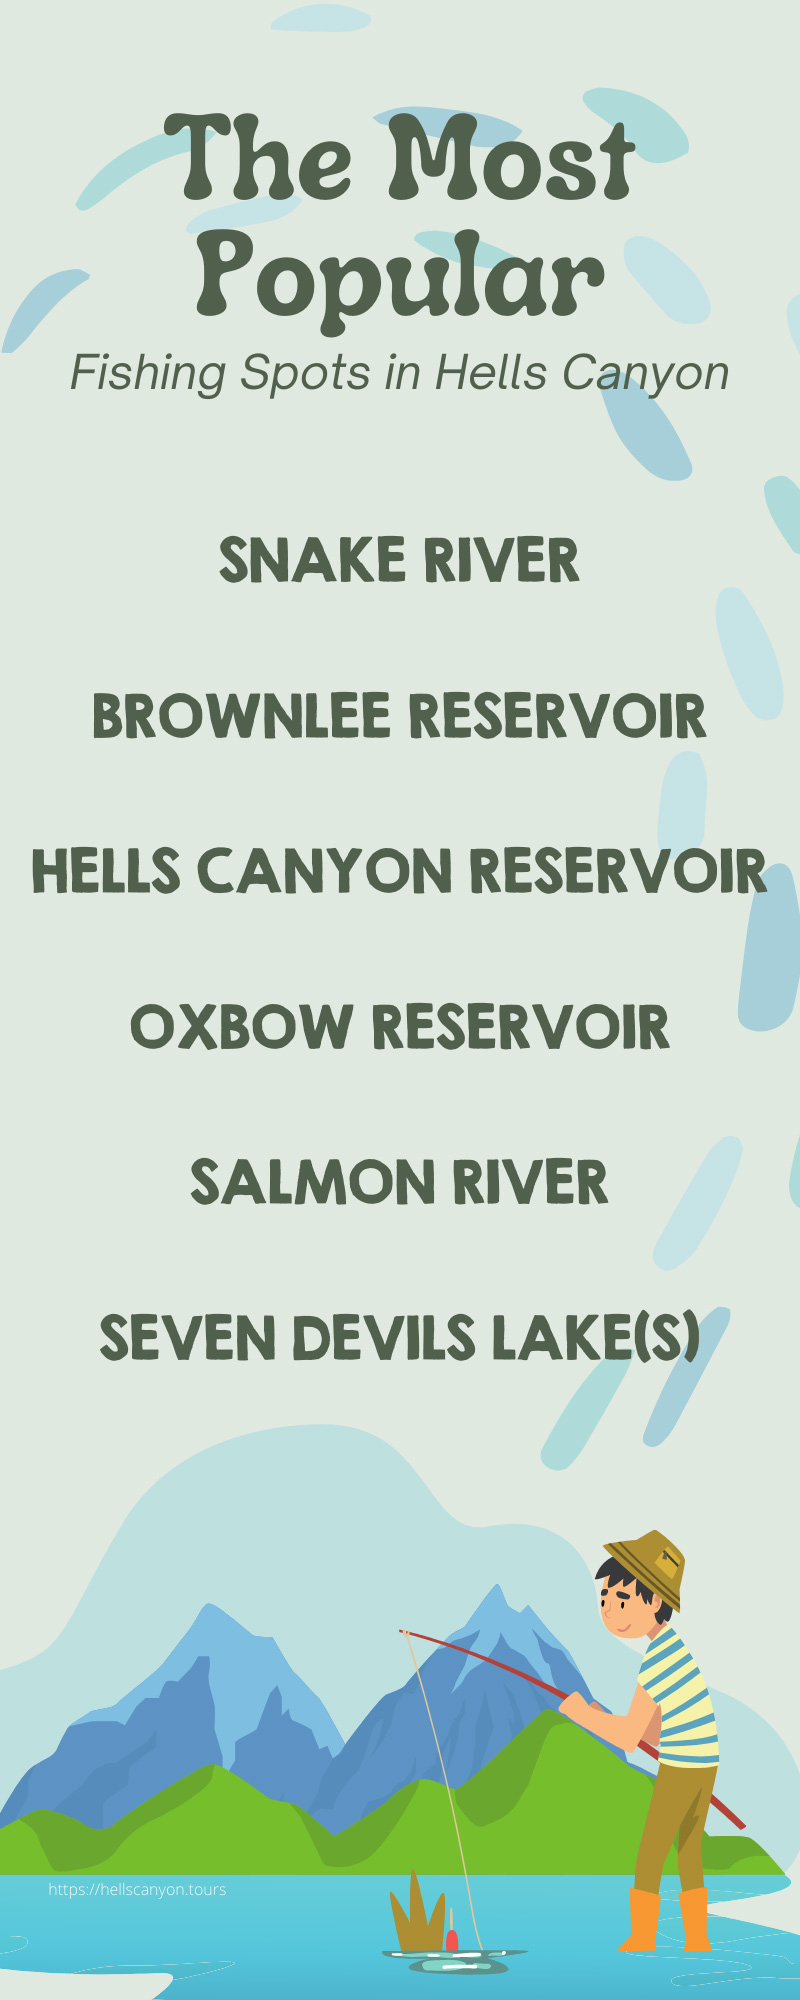 The Most Popular Fishing Spots in Hells Canyon